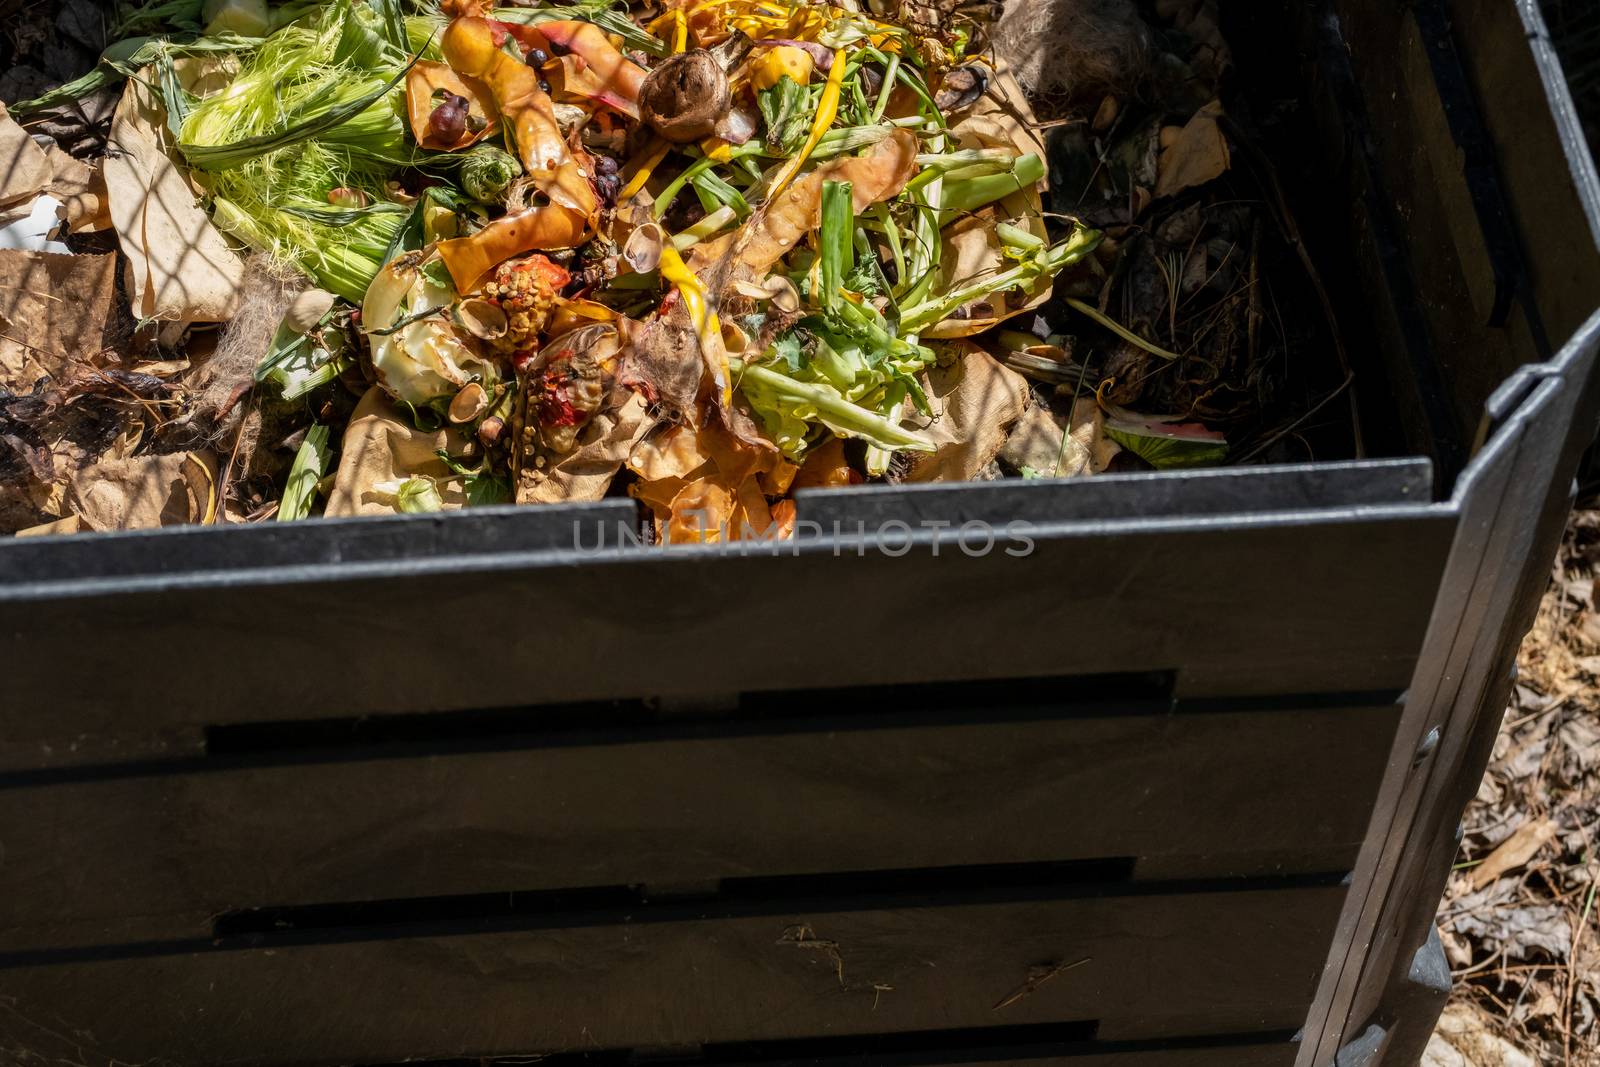 Compost in Outdoor Plastic Bin by colintemple